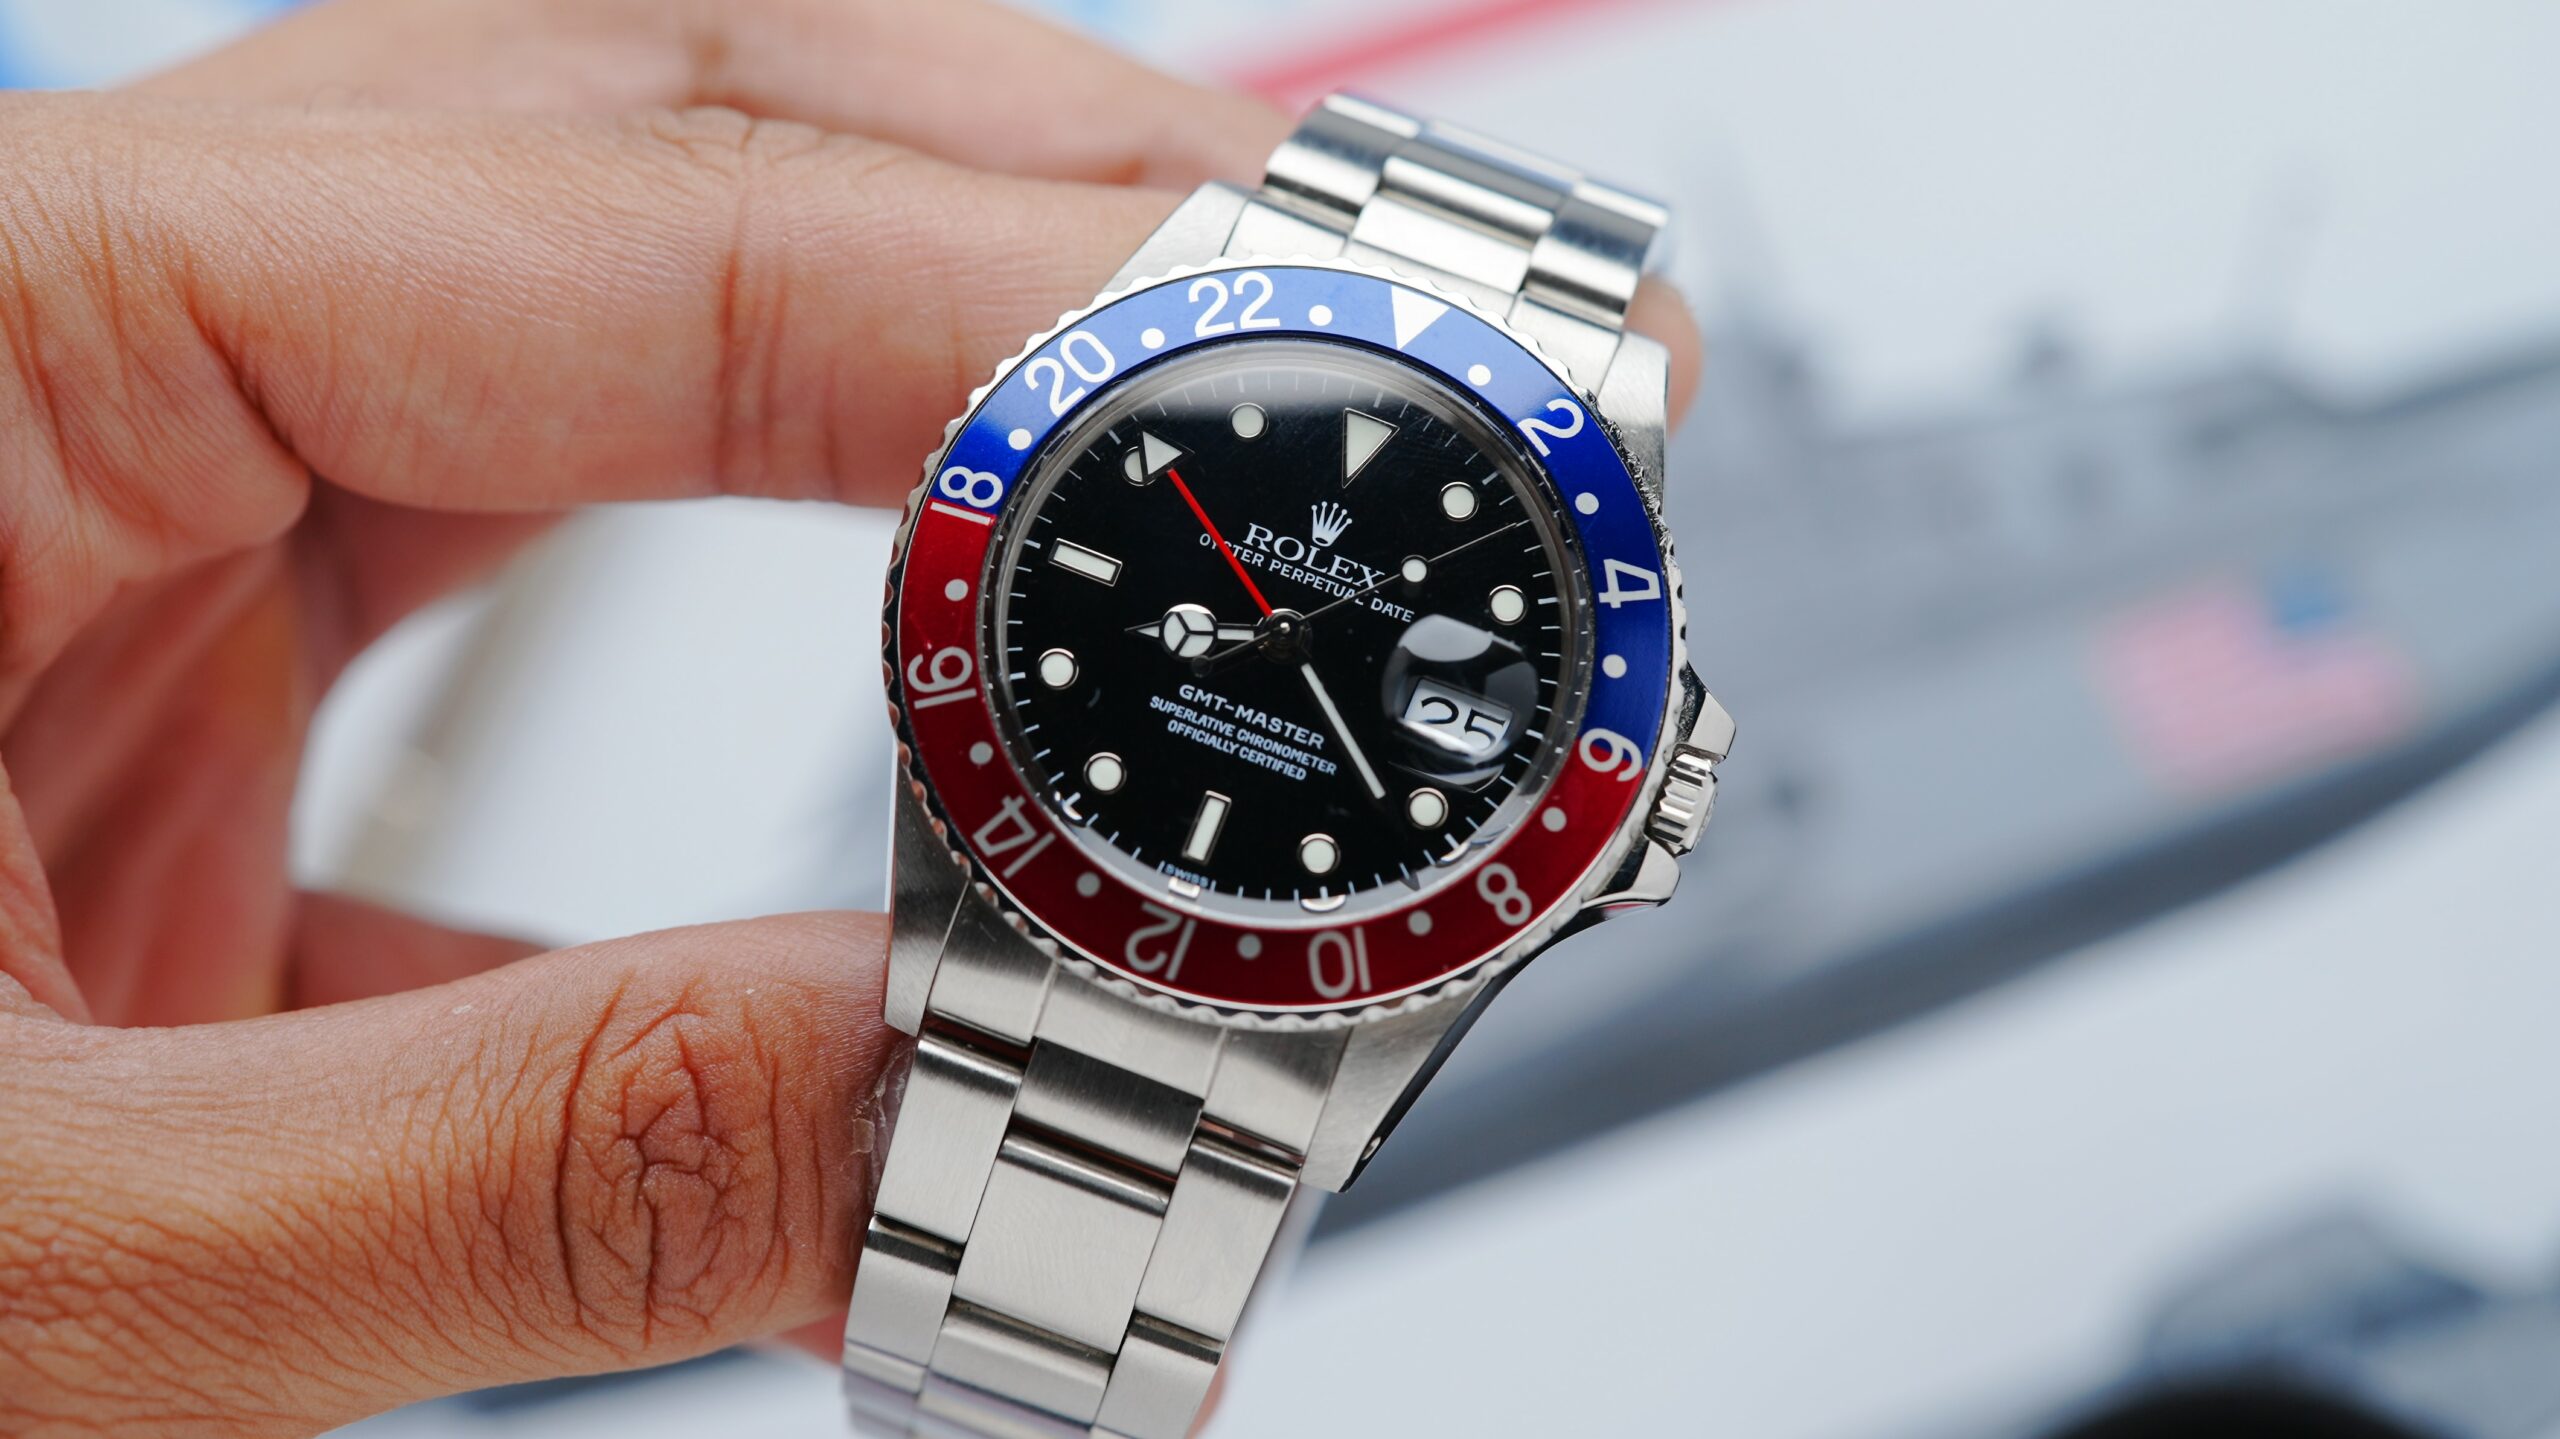 Rolex GMT-Master Pepsi watch held with fingers.